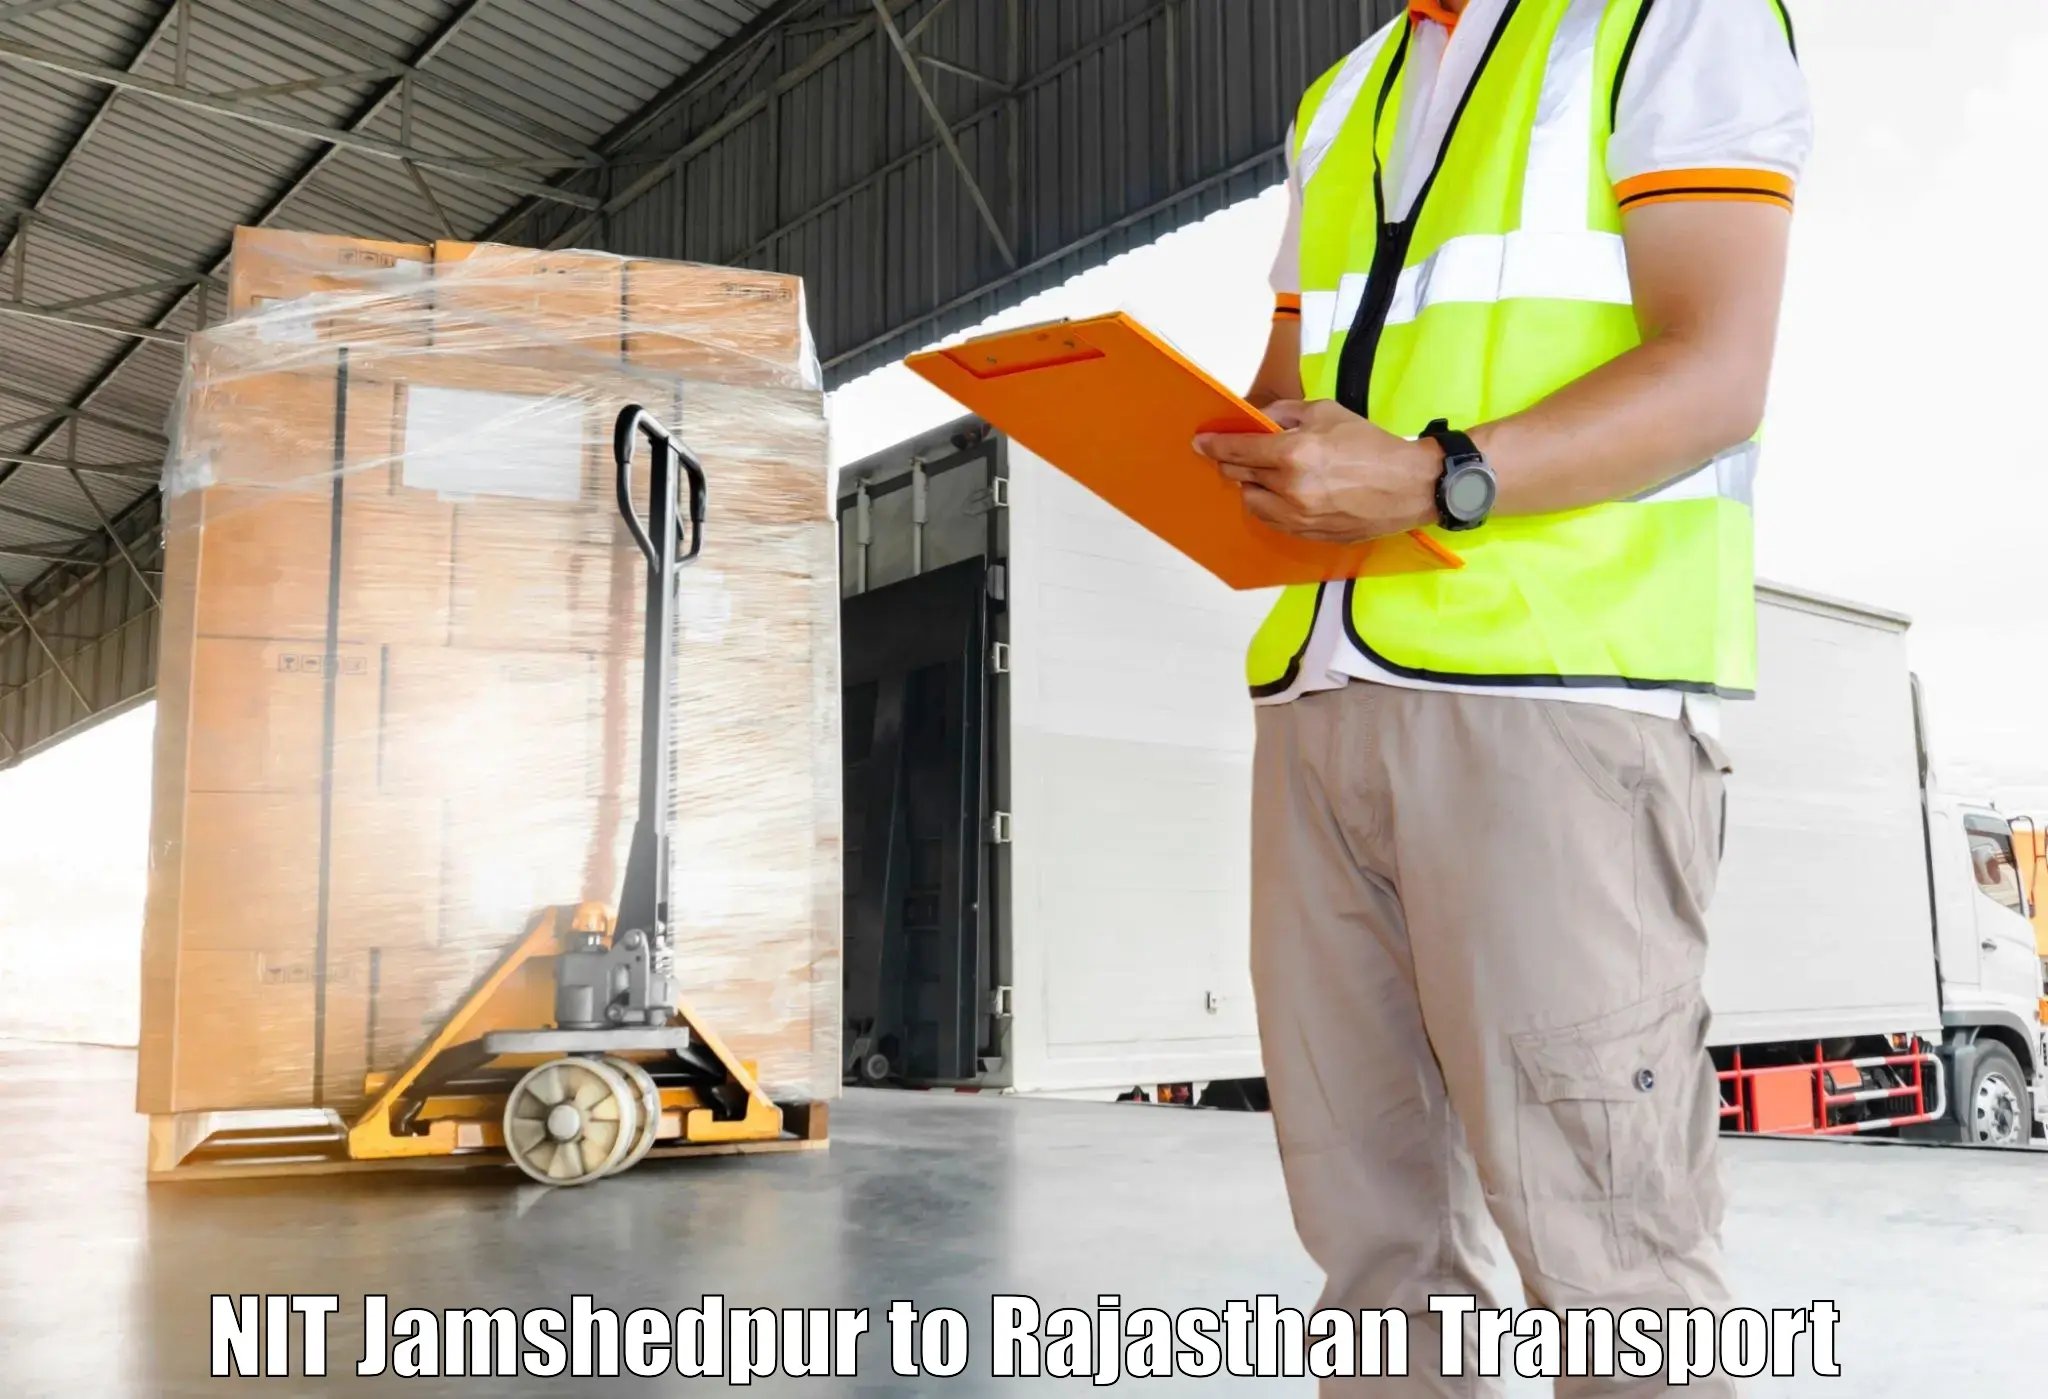 Cargo train transport services NIT Jamshedpur to Sirohi